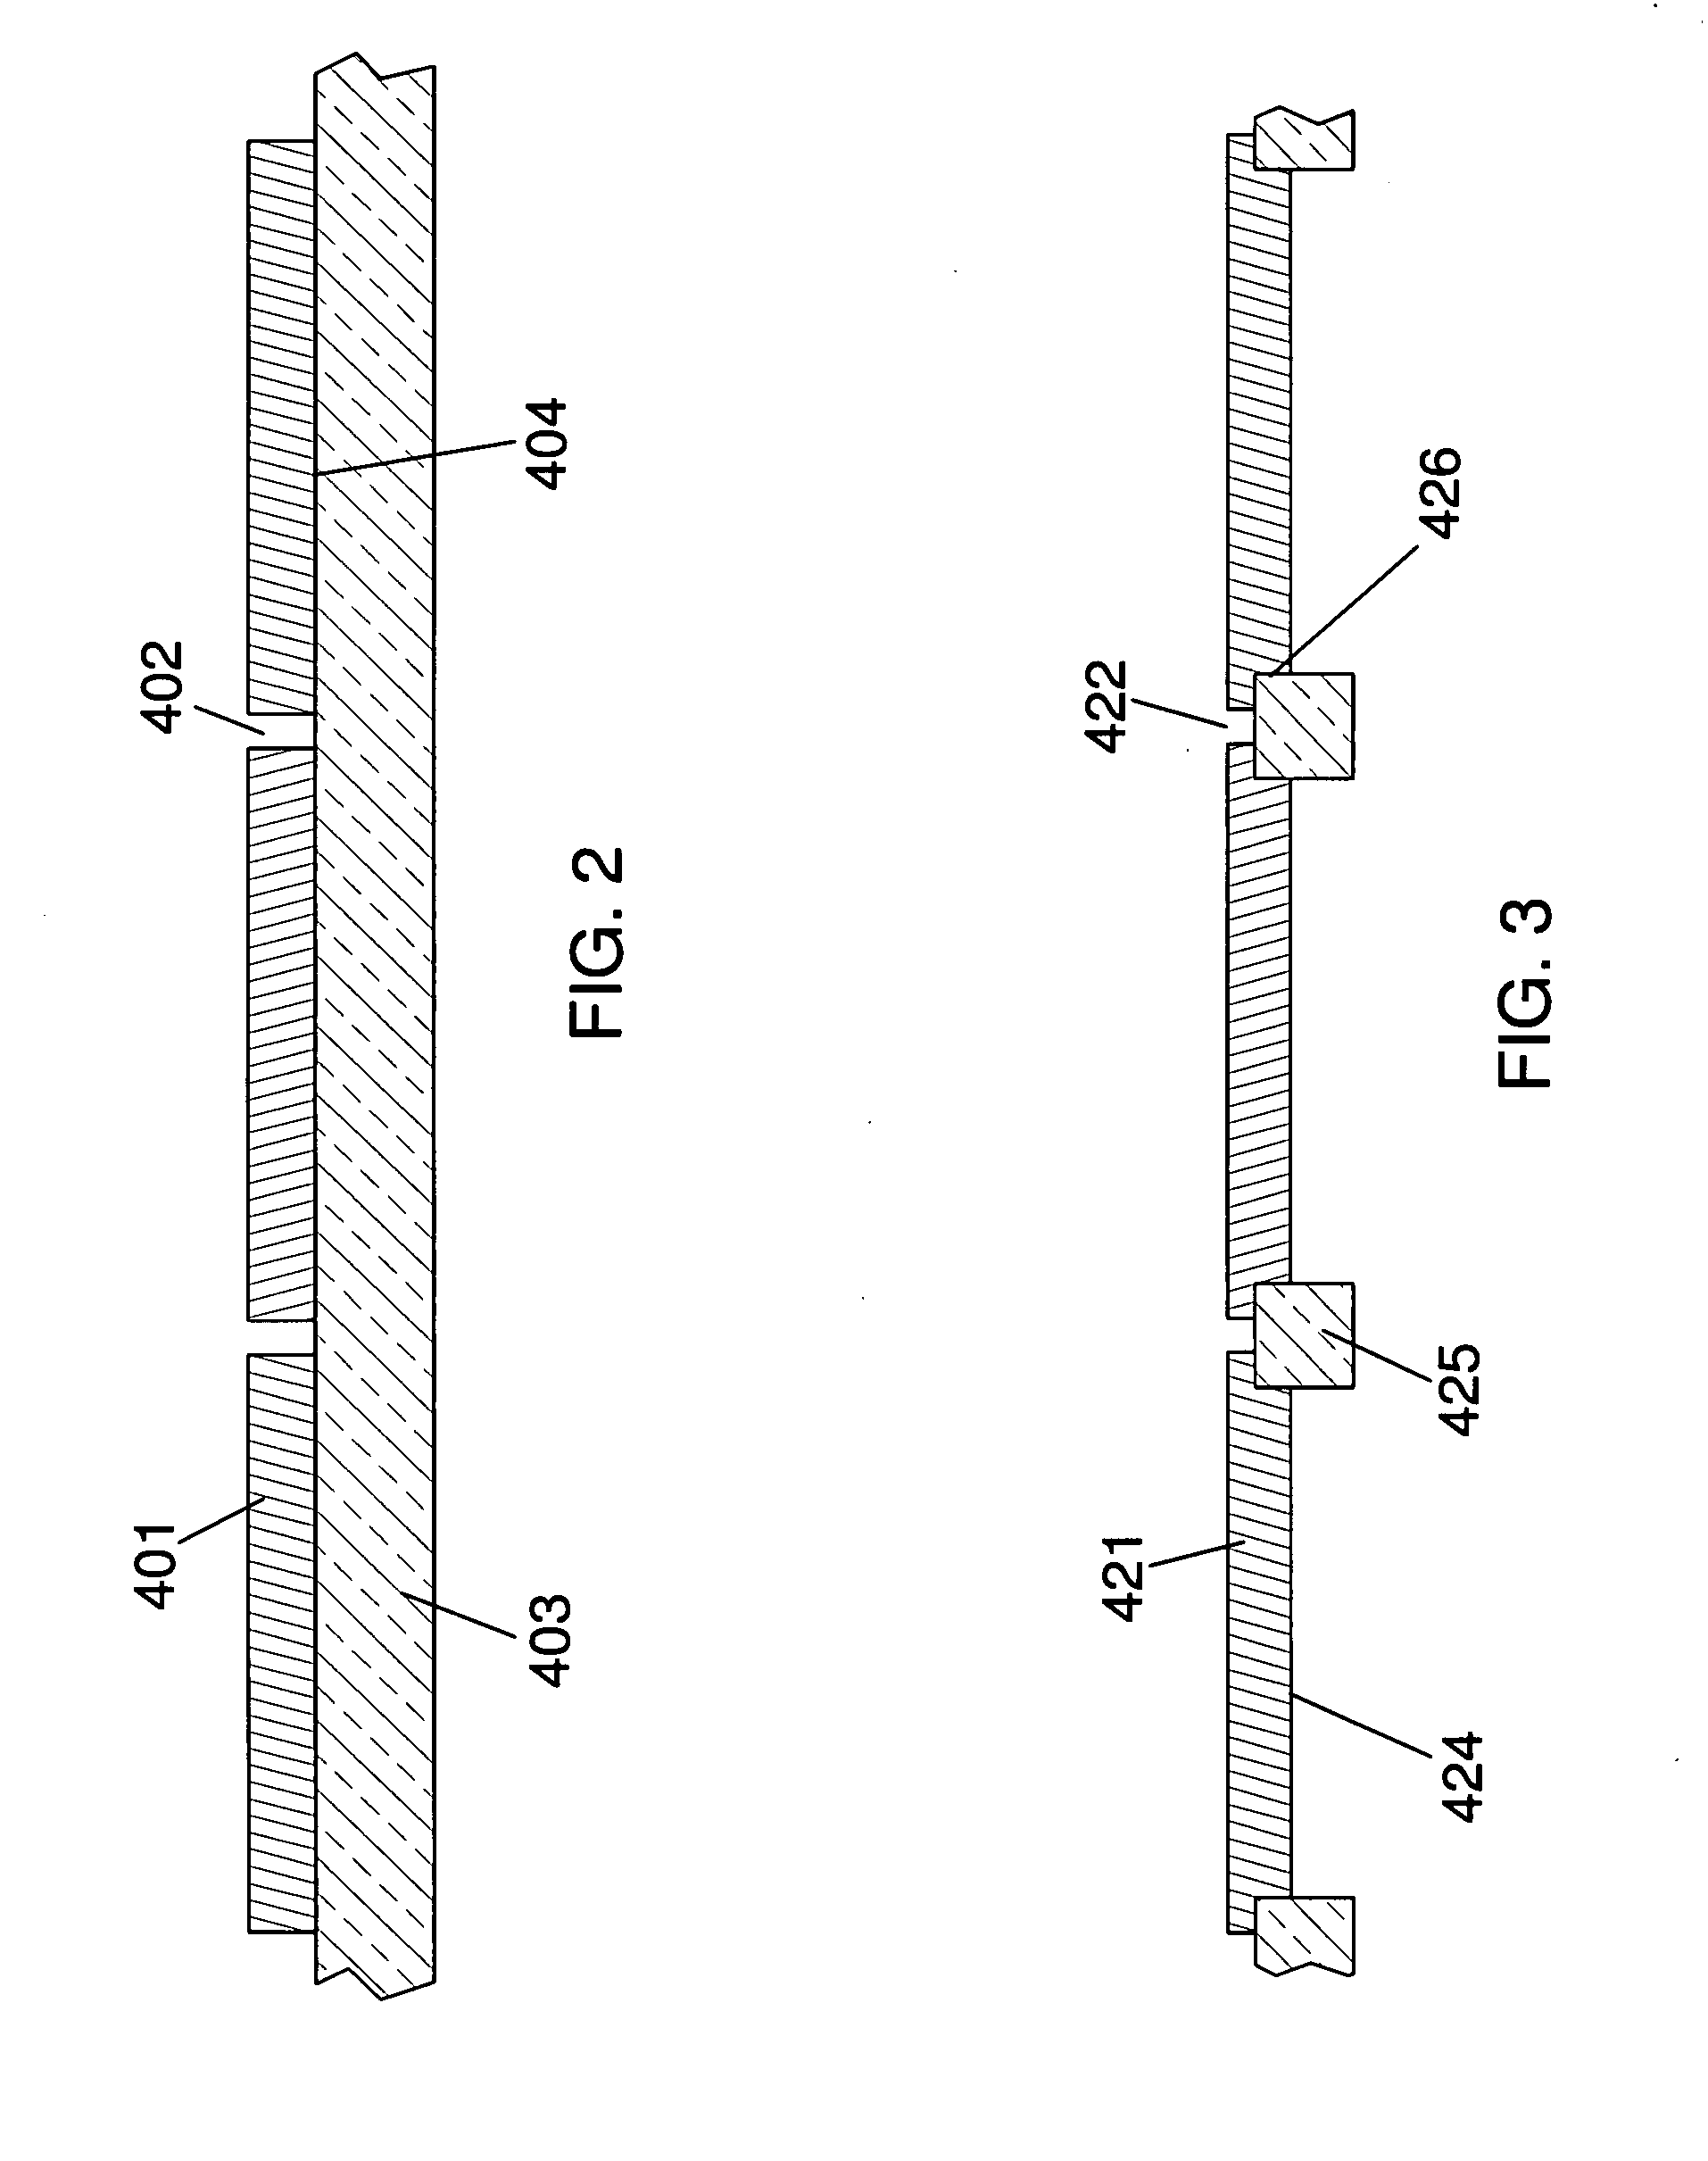 Integrated method and system for manufacturing monolithic panels of crystalline solar cells